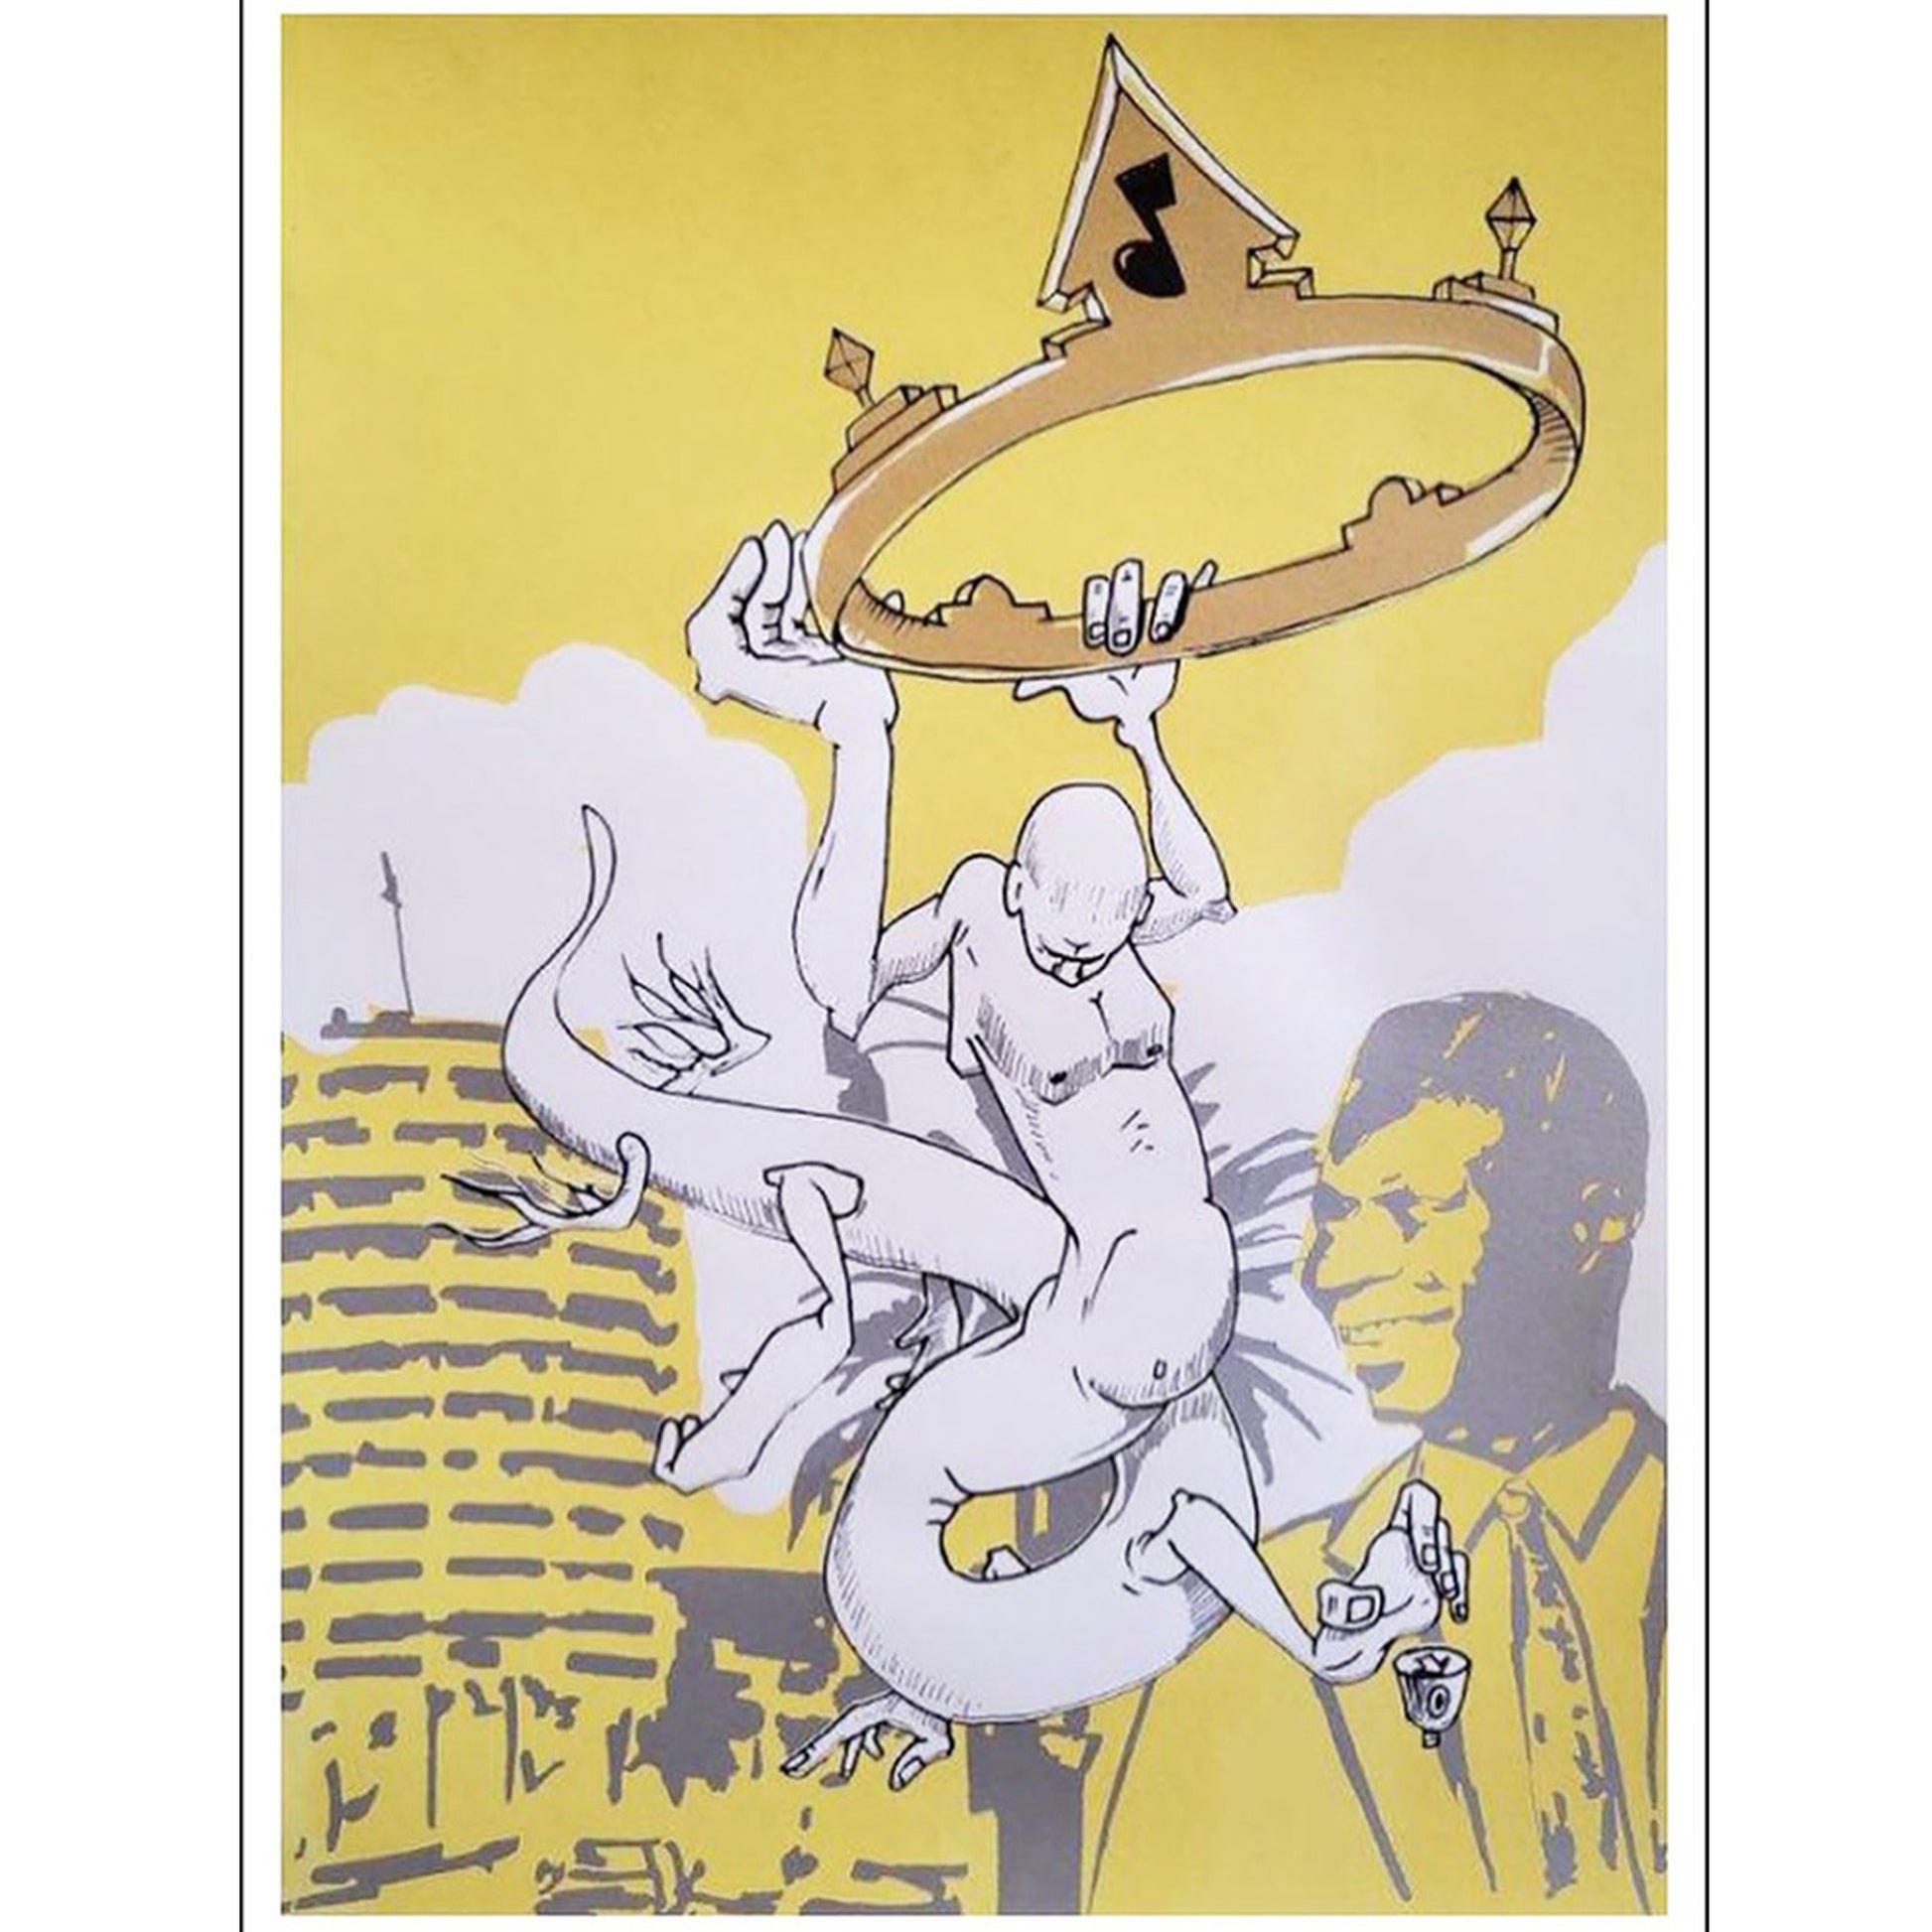 "king one" print by Man One, a print with tones of yellows,grey and black on white paper.